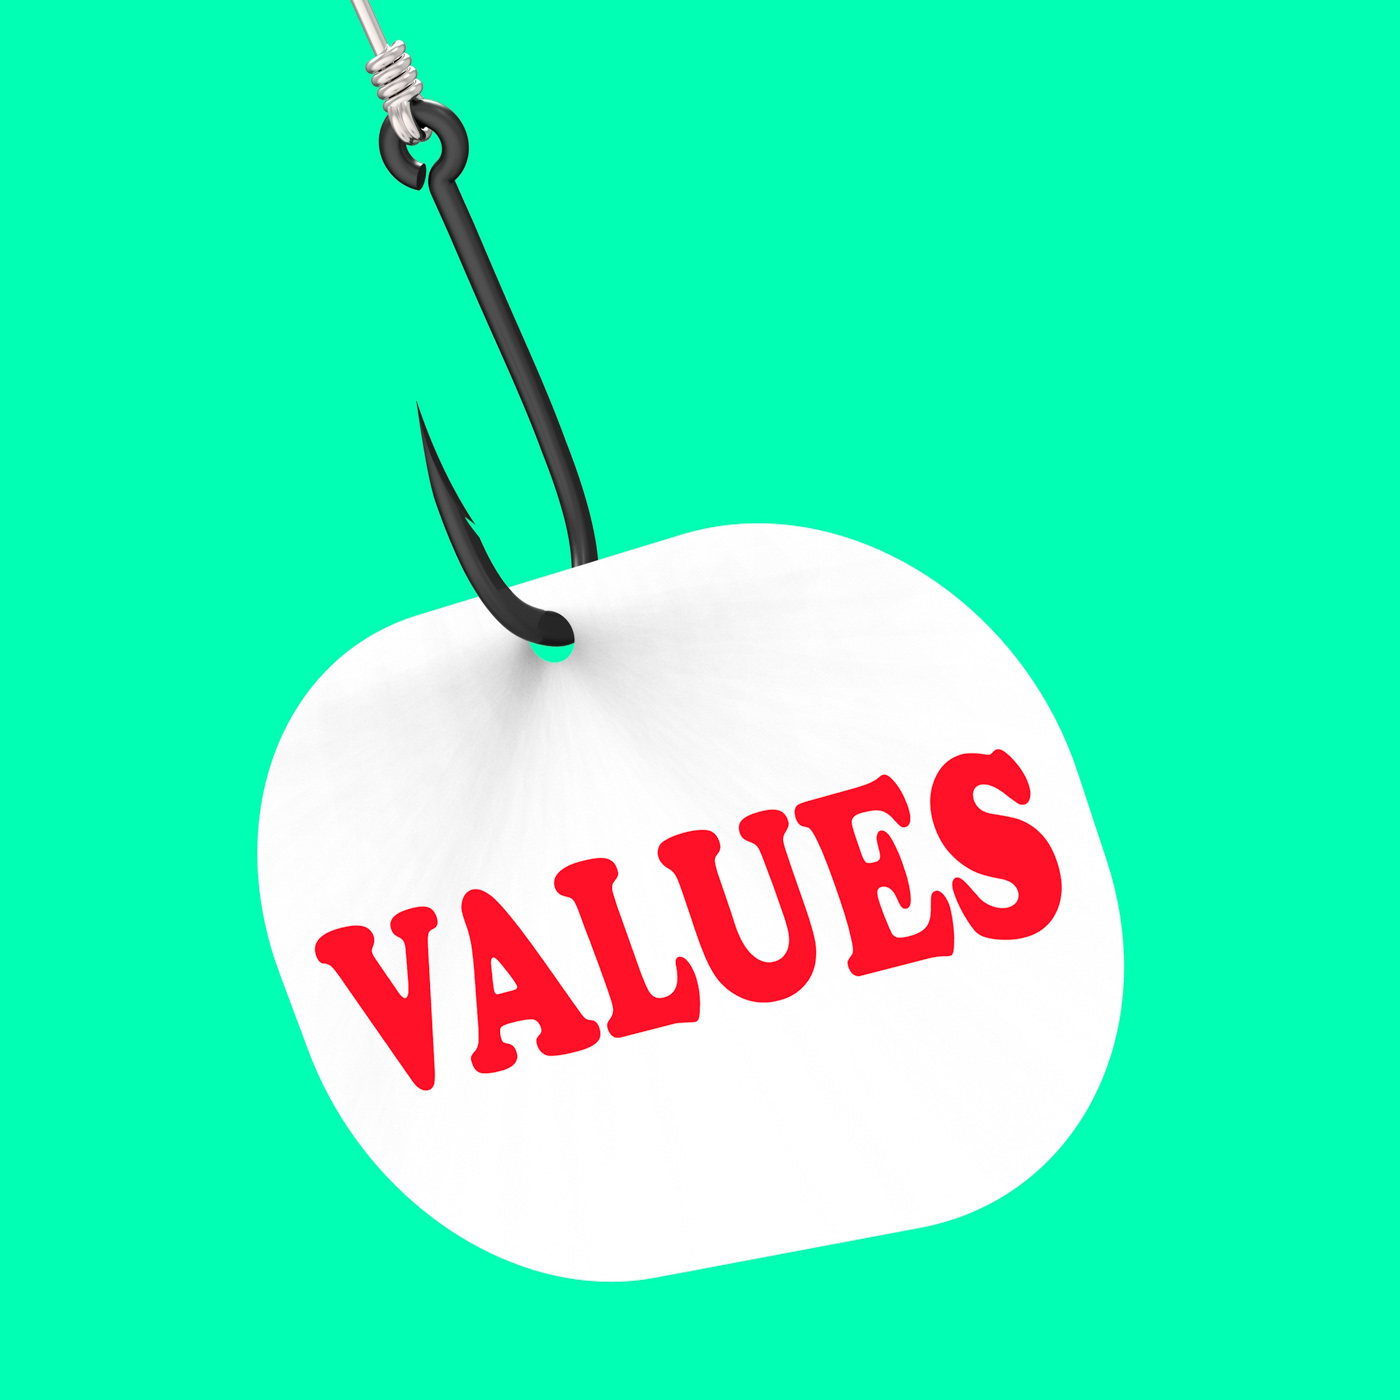 Values on hook means ethical values or morality photo